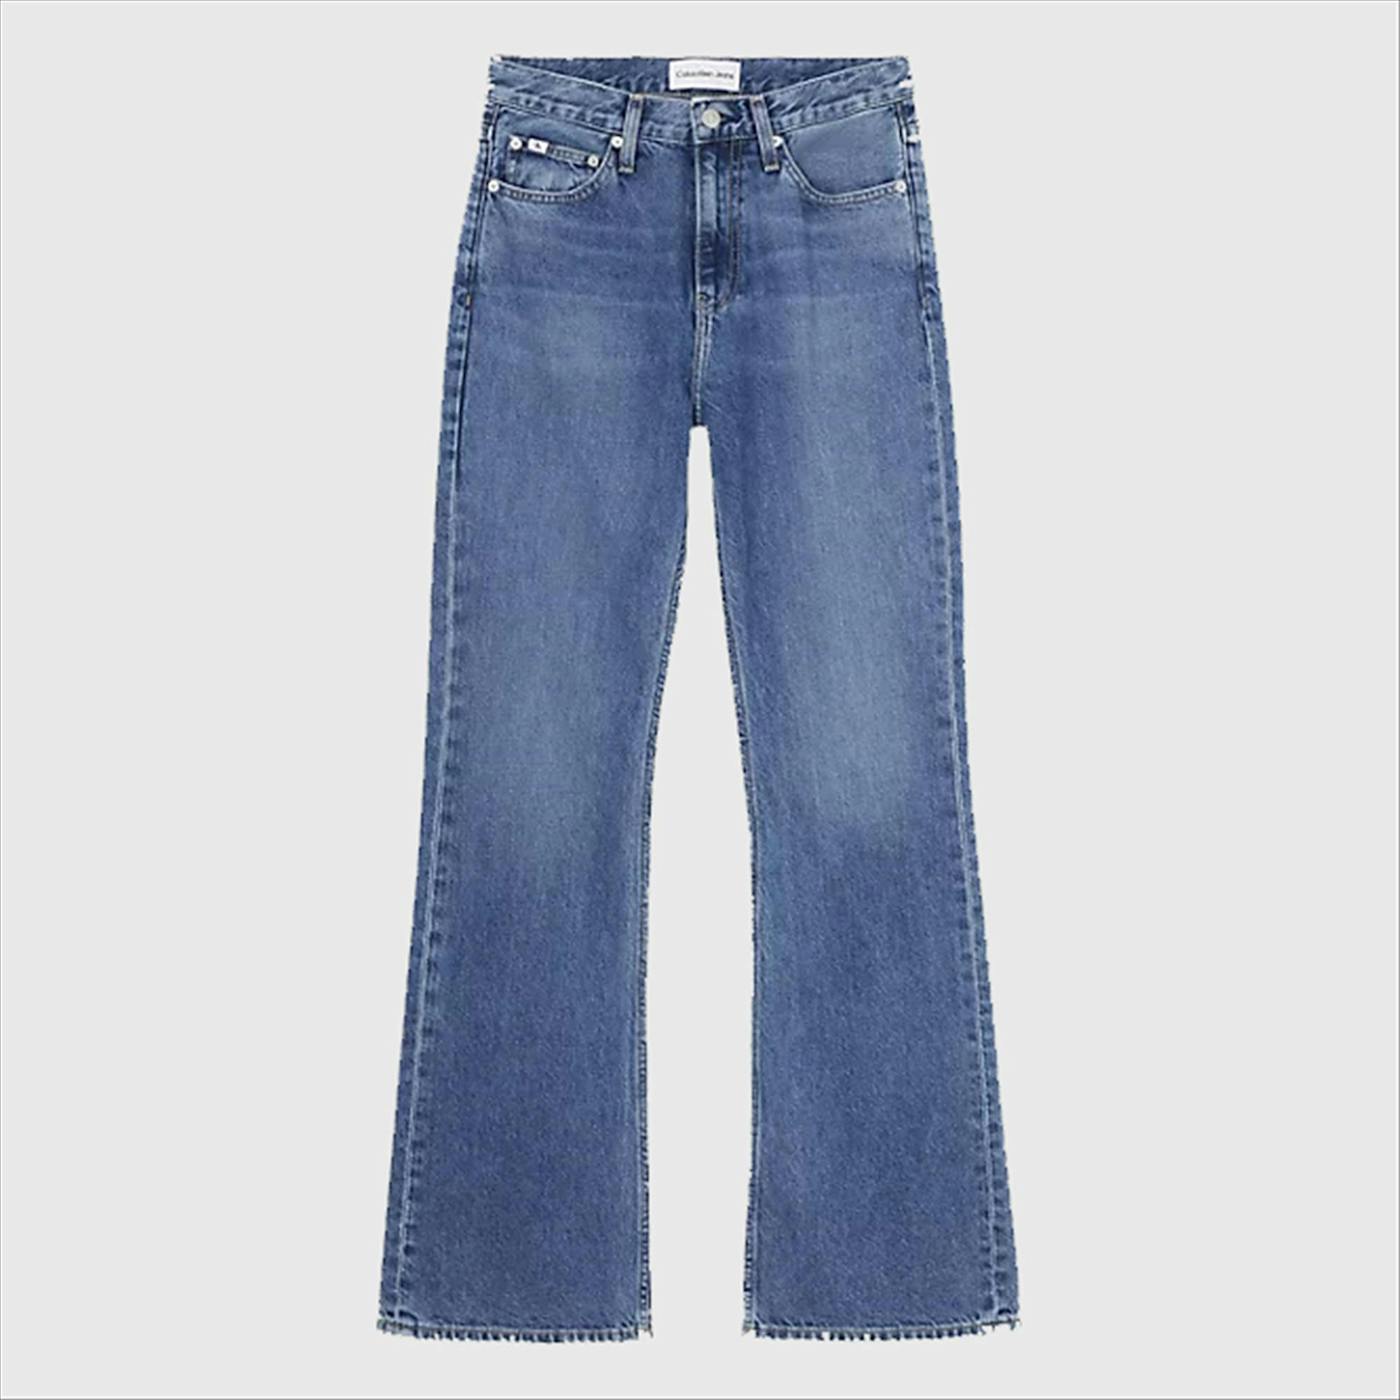 Calvin Klein Jeans - Blauwe Authentic Bootcut jeans